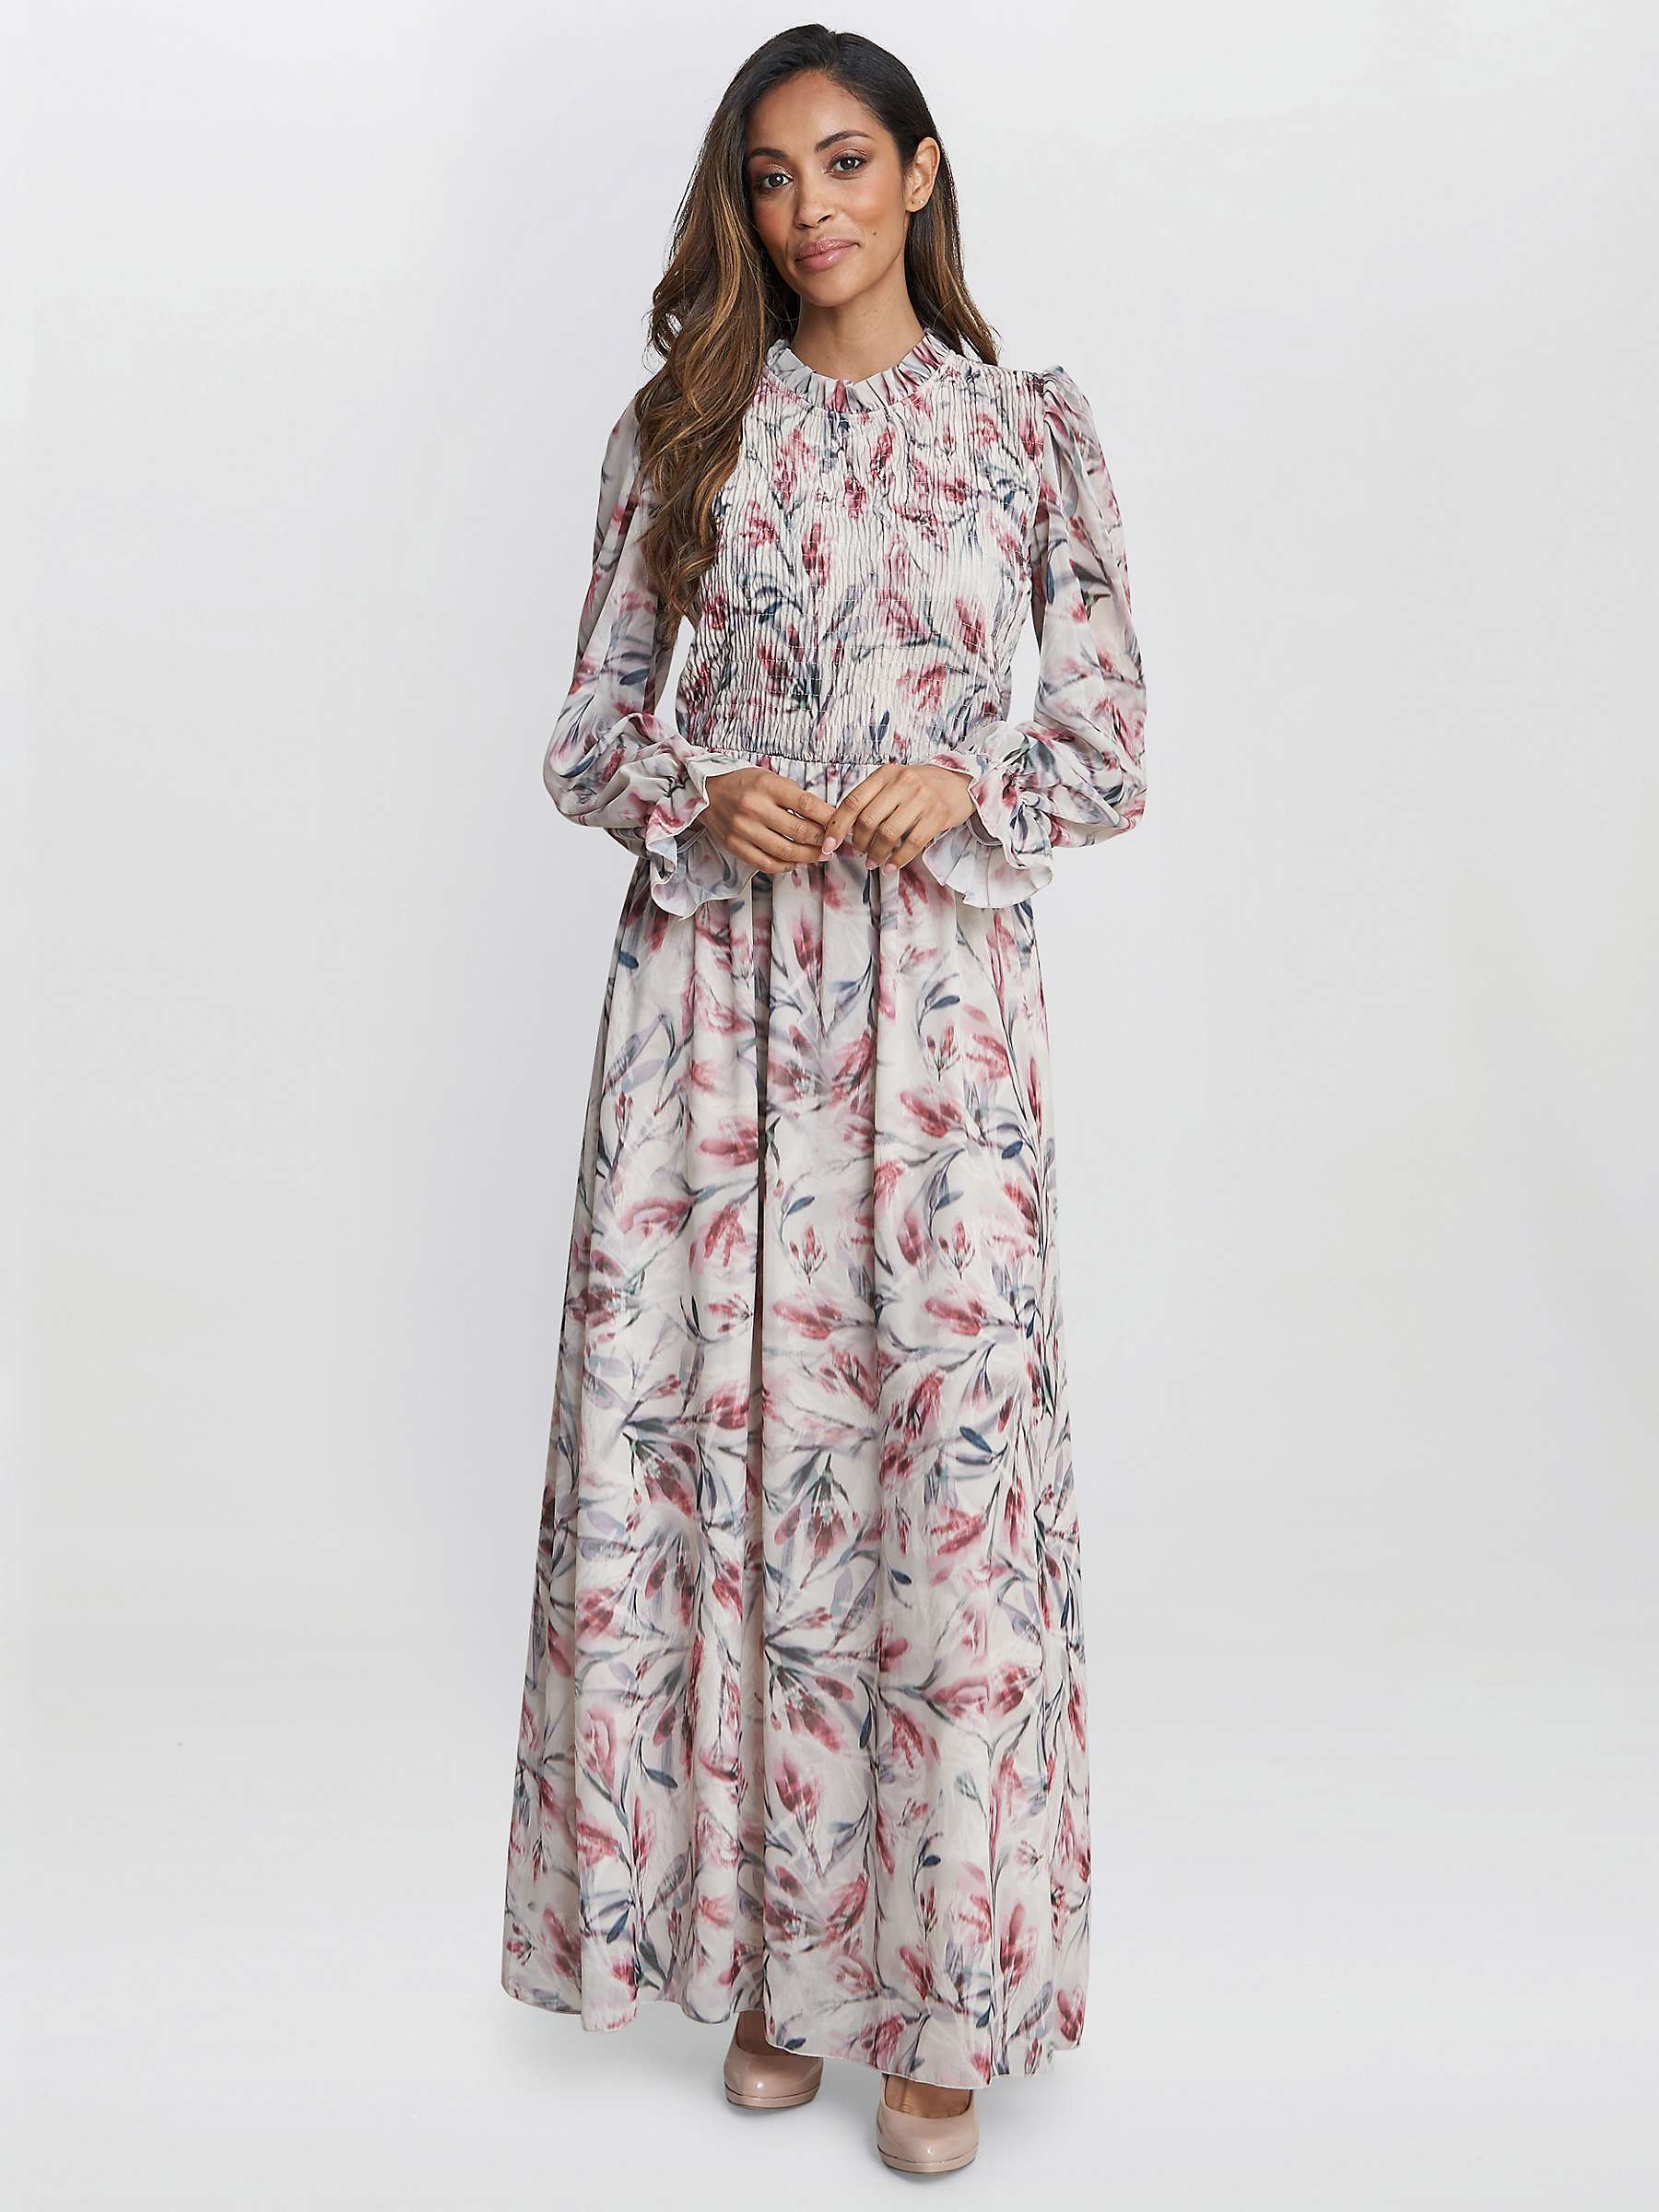 Buy Gina Bacconi Thea Floral Maxi Dress, White/Multi Online at johnlewis.com